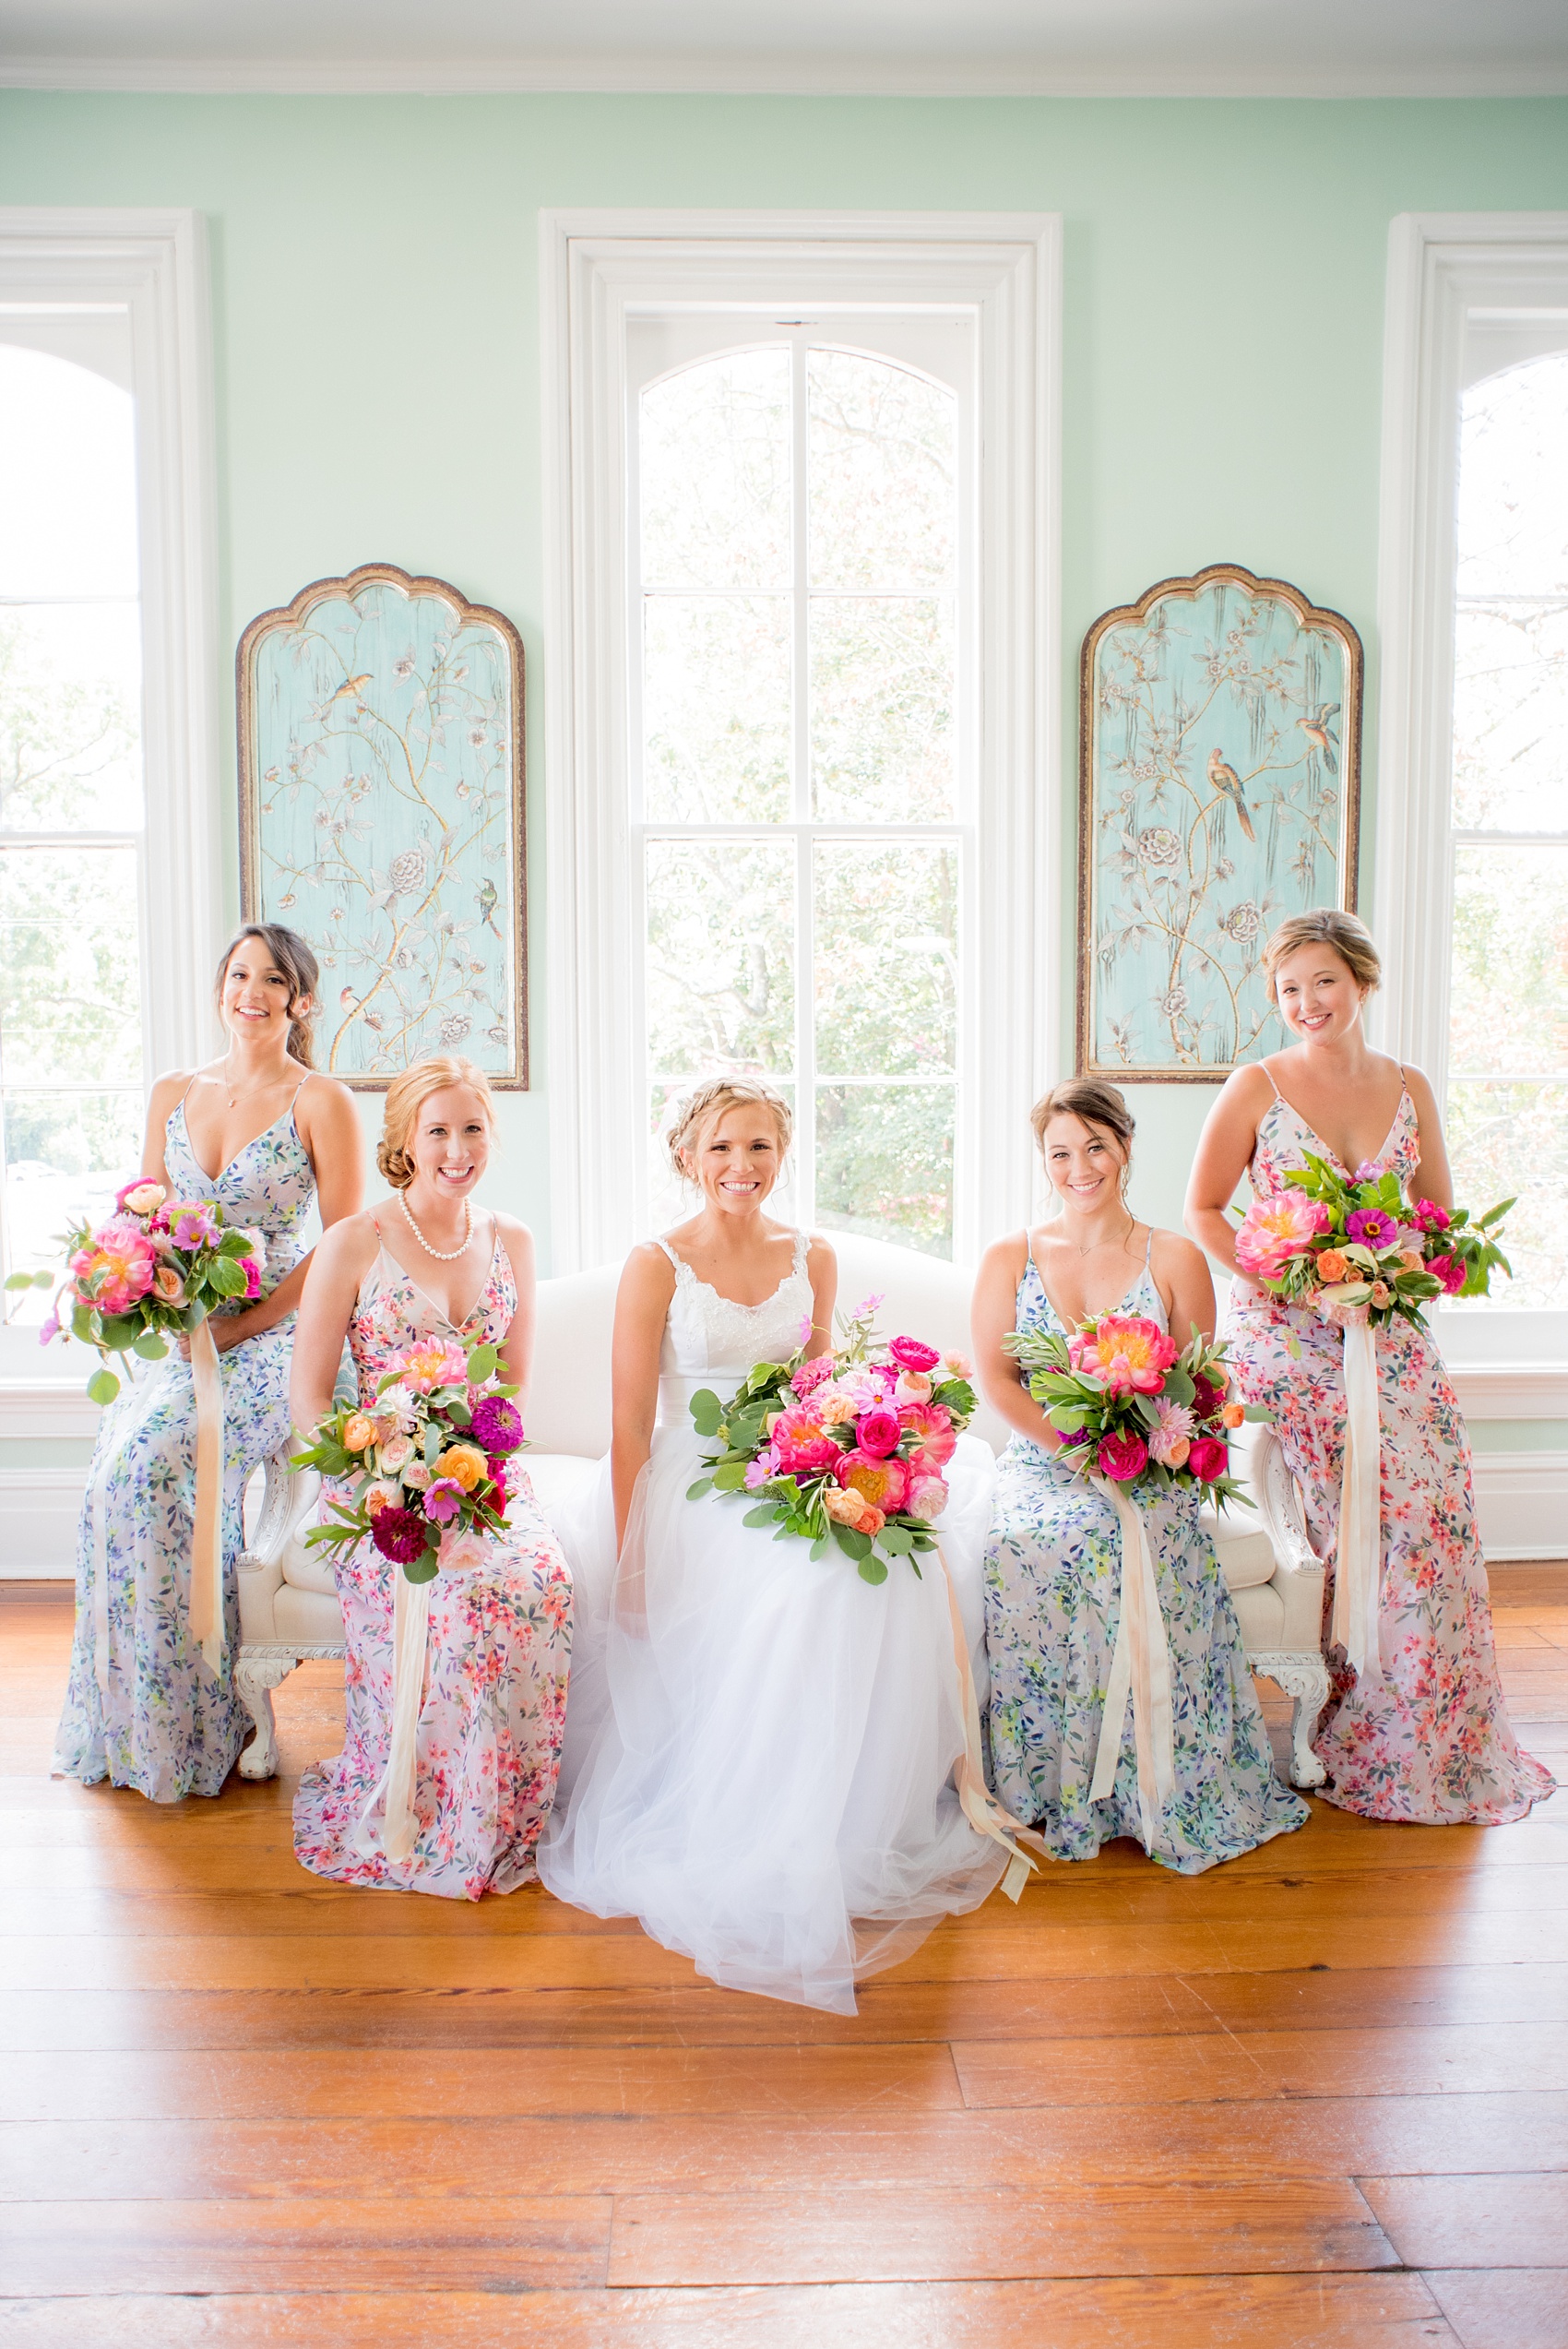 Mikkel Paige Photography wedding photos at The Merrimon-Wynne House in downtown Raleigh. Bridal party in floral maxi dresses in blue and pink and colorful garden rose and peony bouquets.